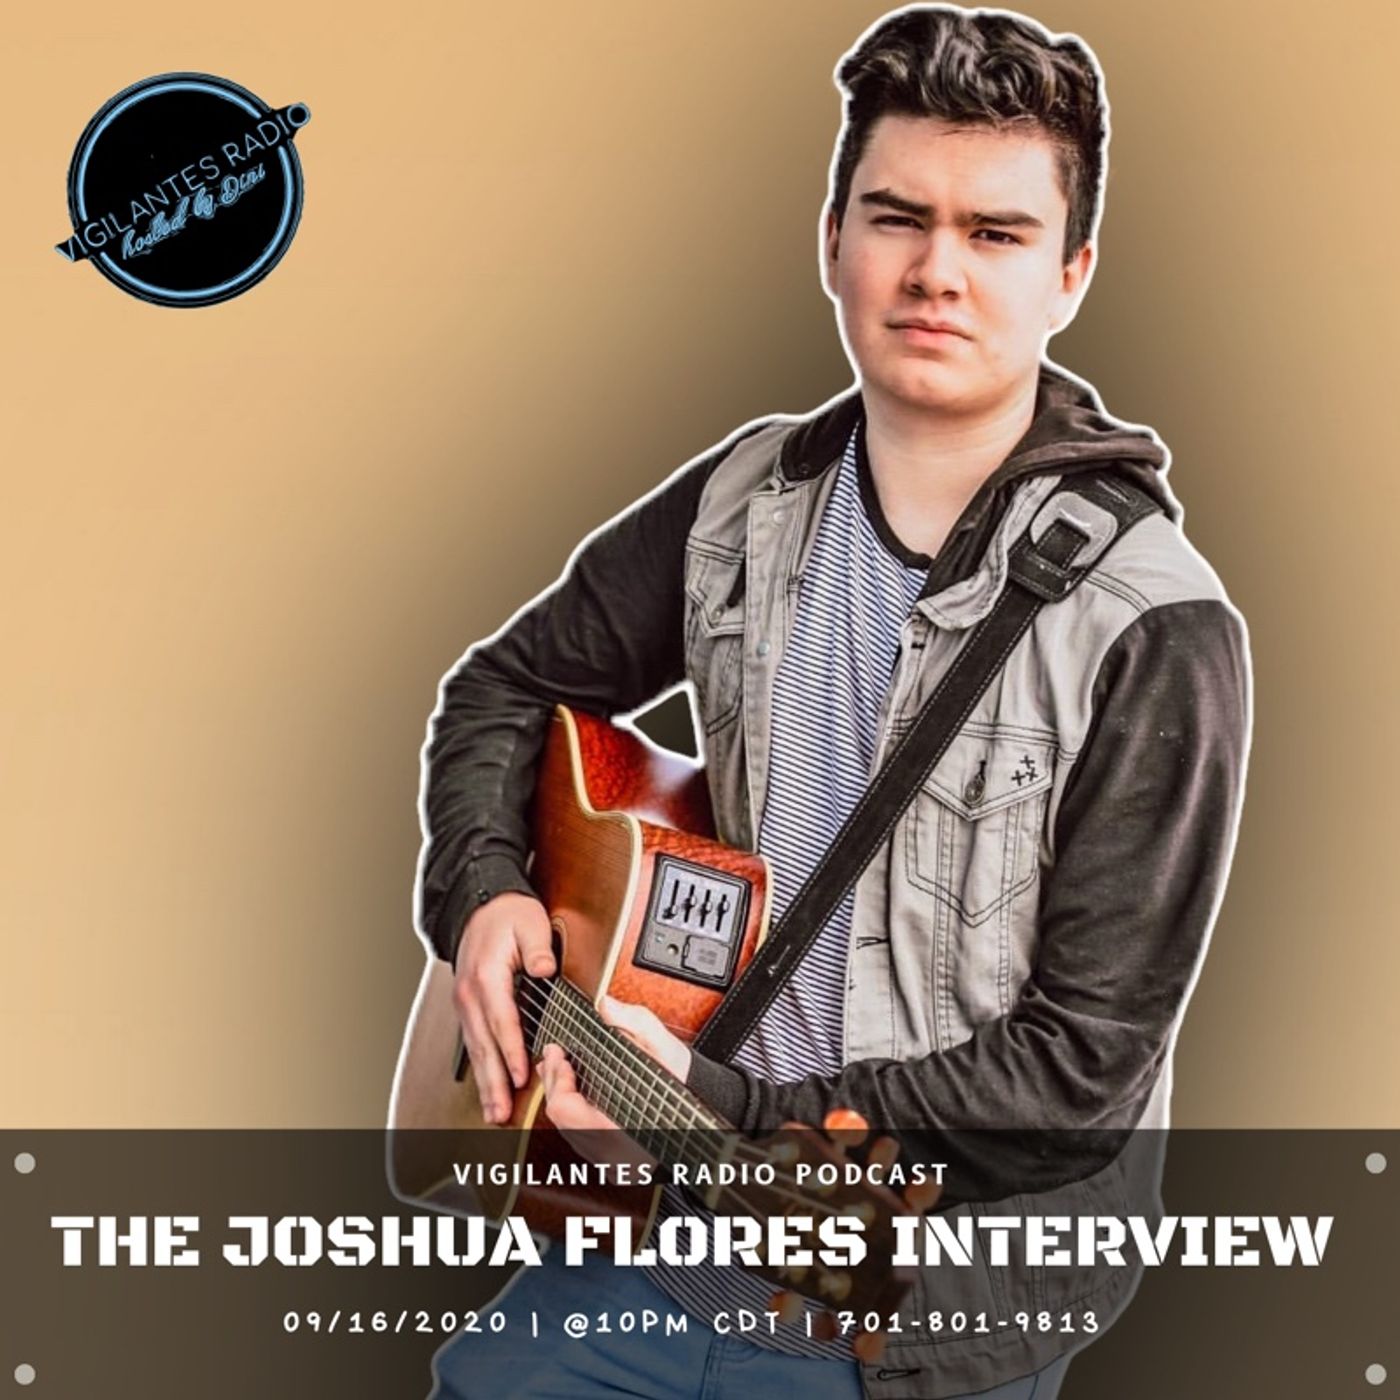 The Joshua Flores Interview.